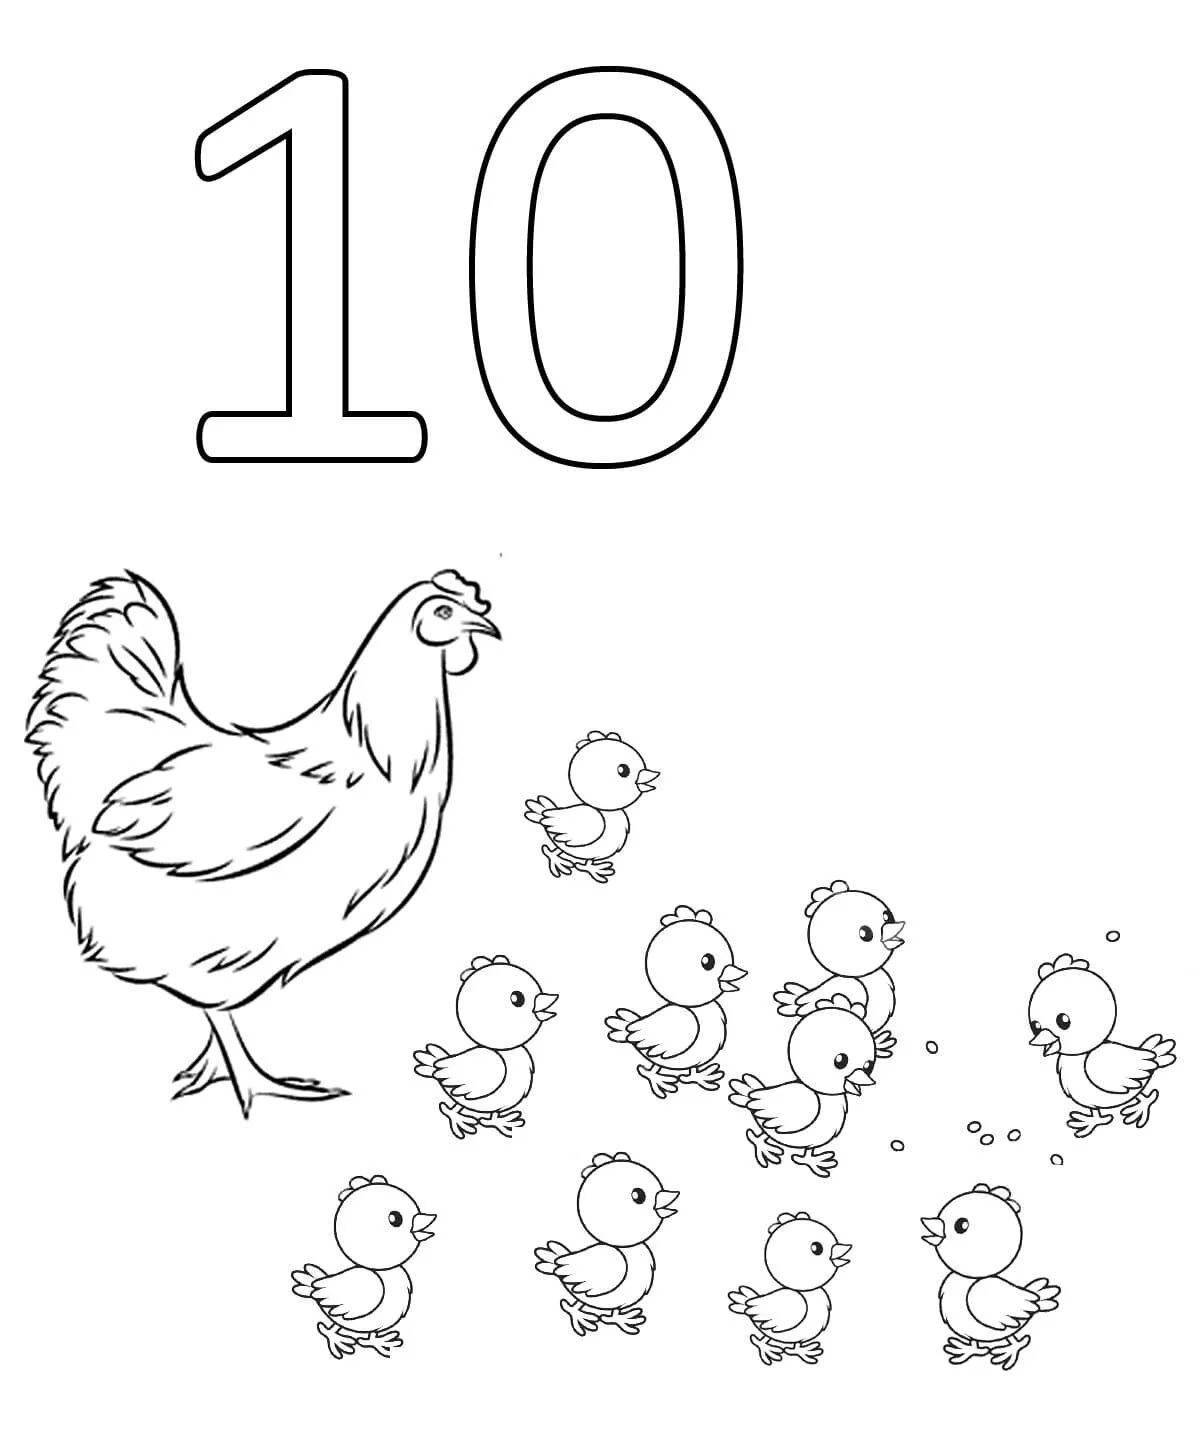 Numbers 1 to 10 for kids #5